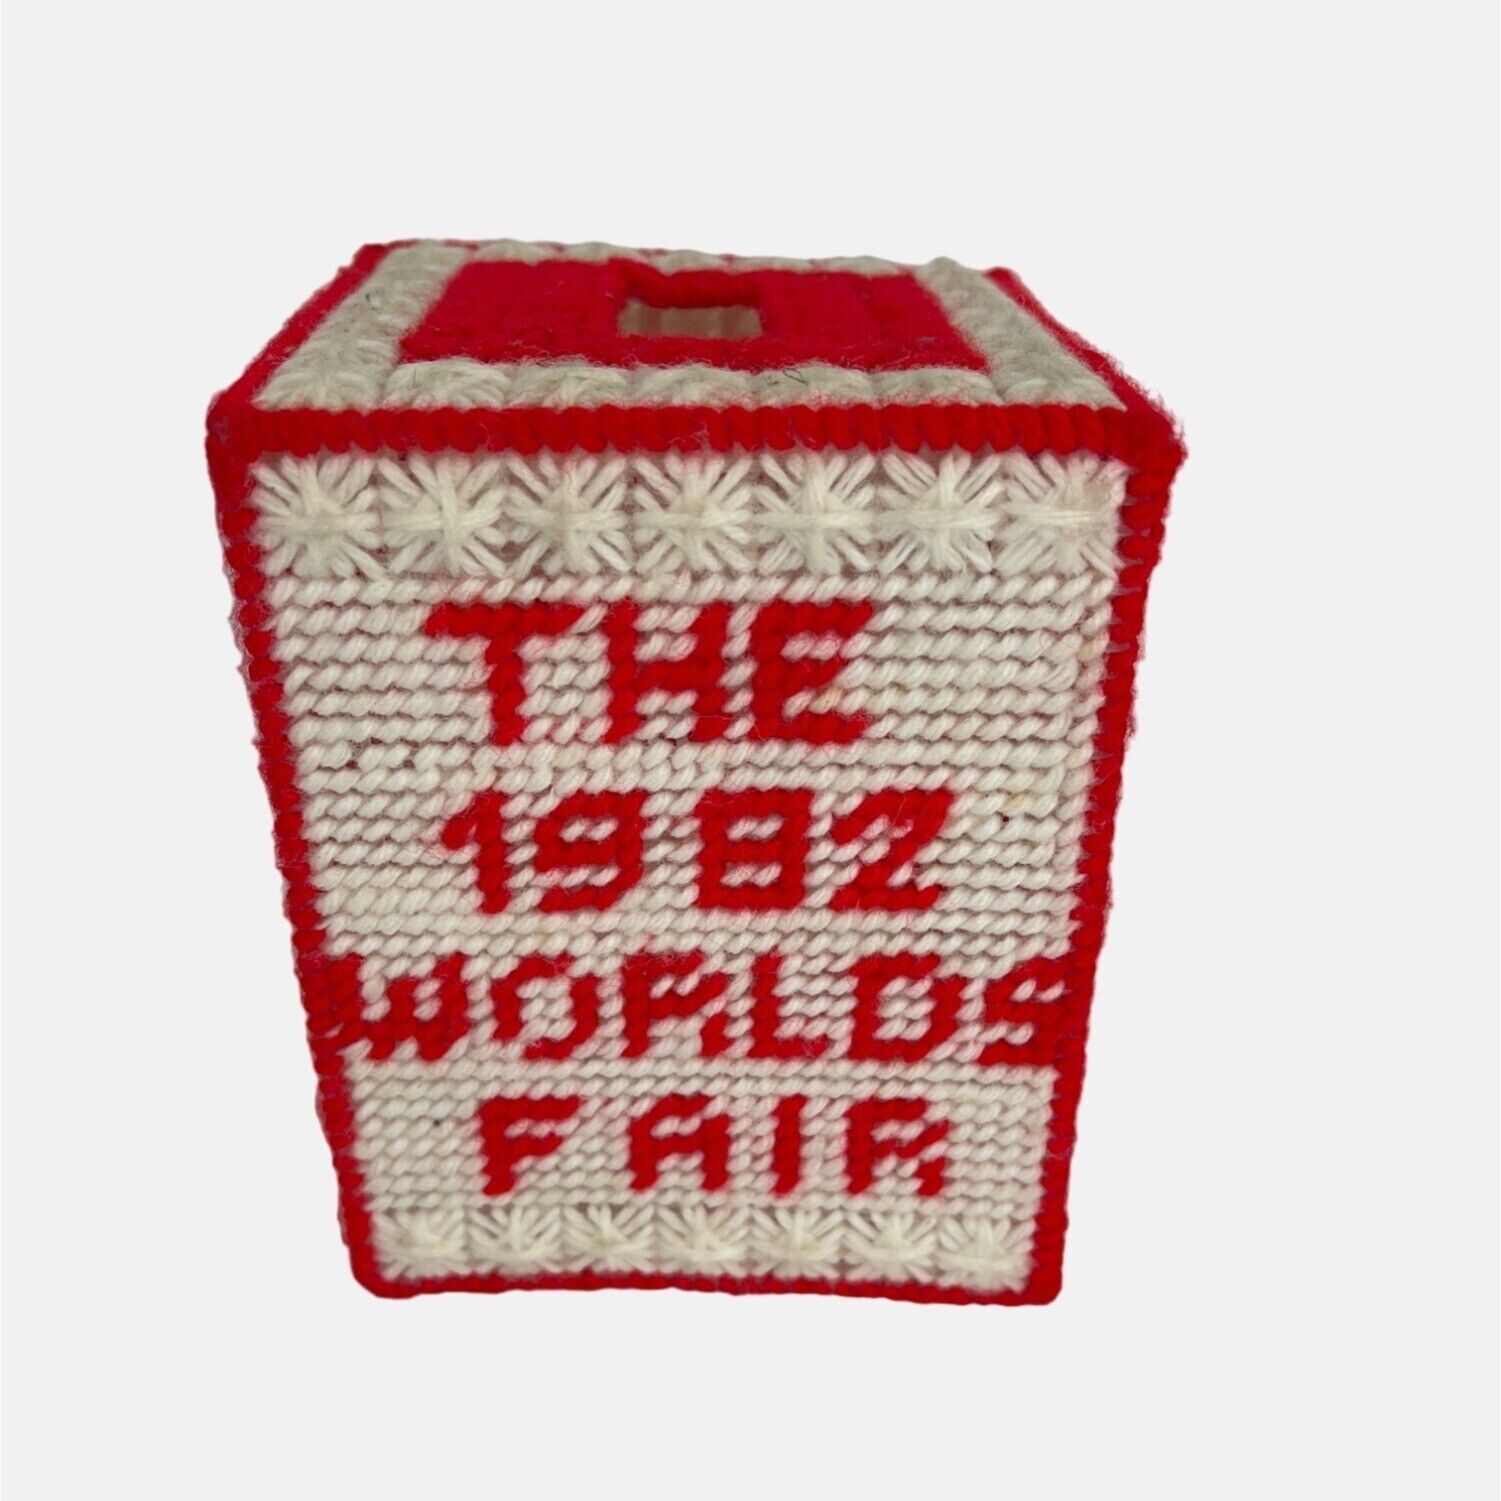 Vintage 1982 Worlds Fair Tissue Box Cover Knoxville Tennessee Collectible